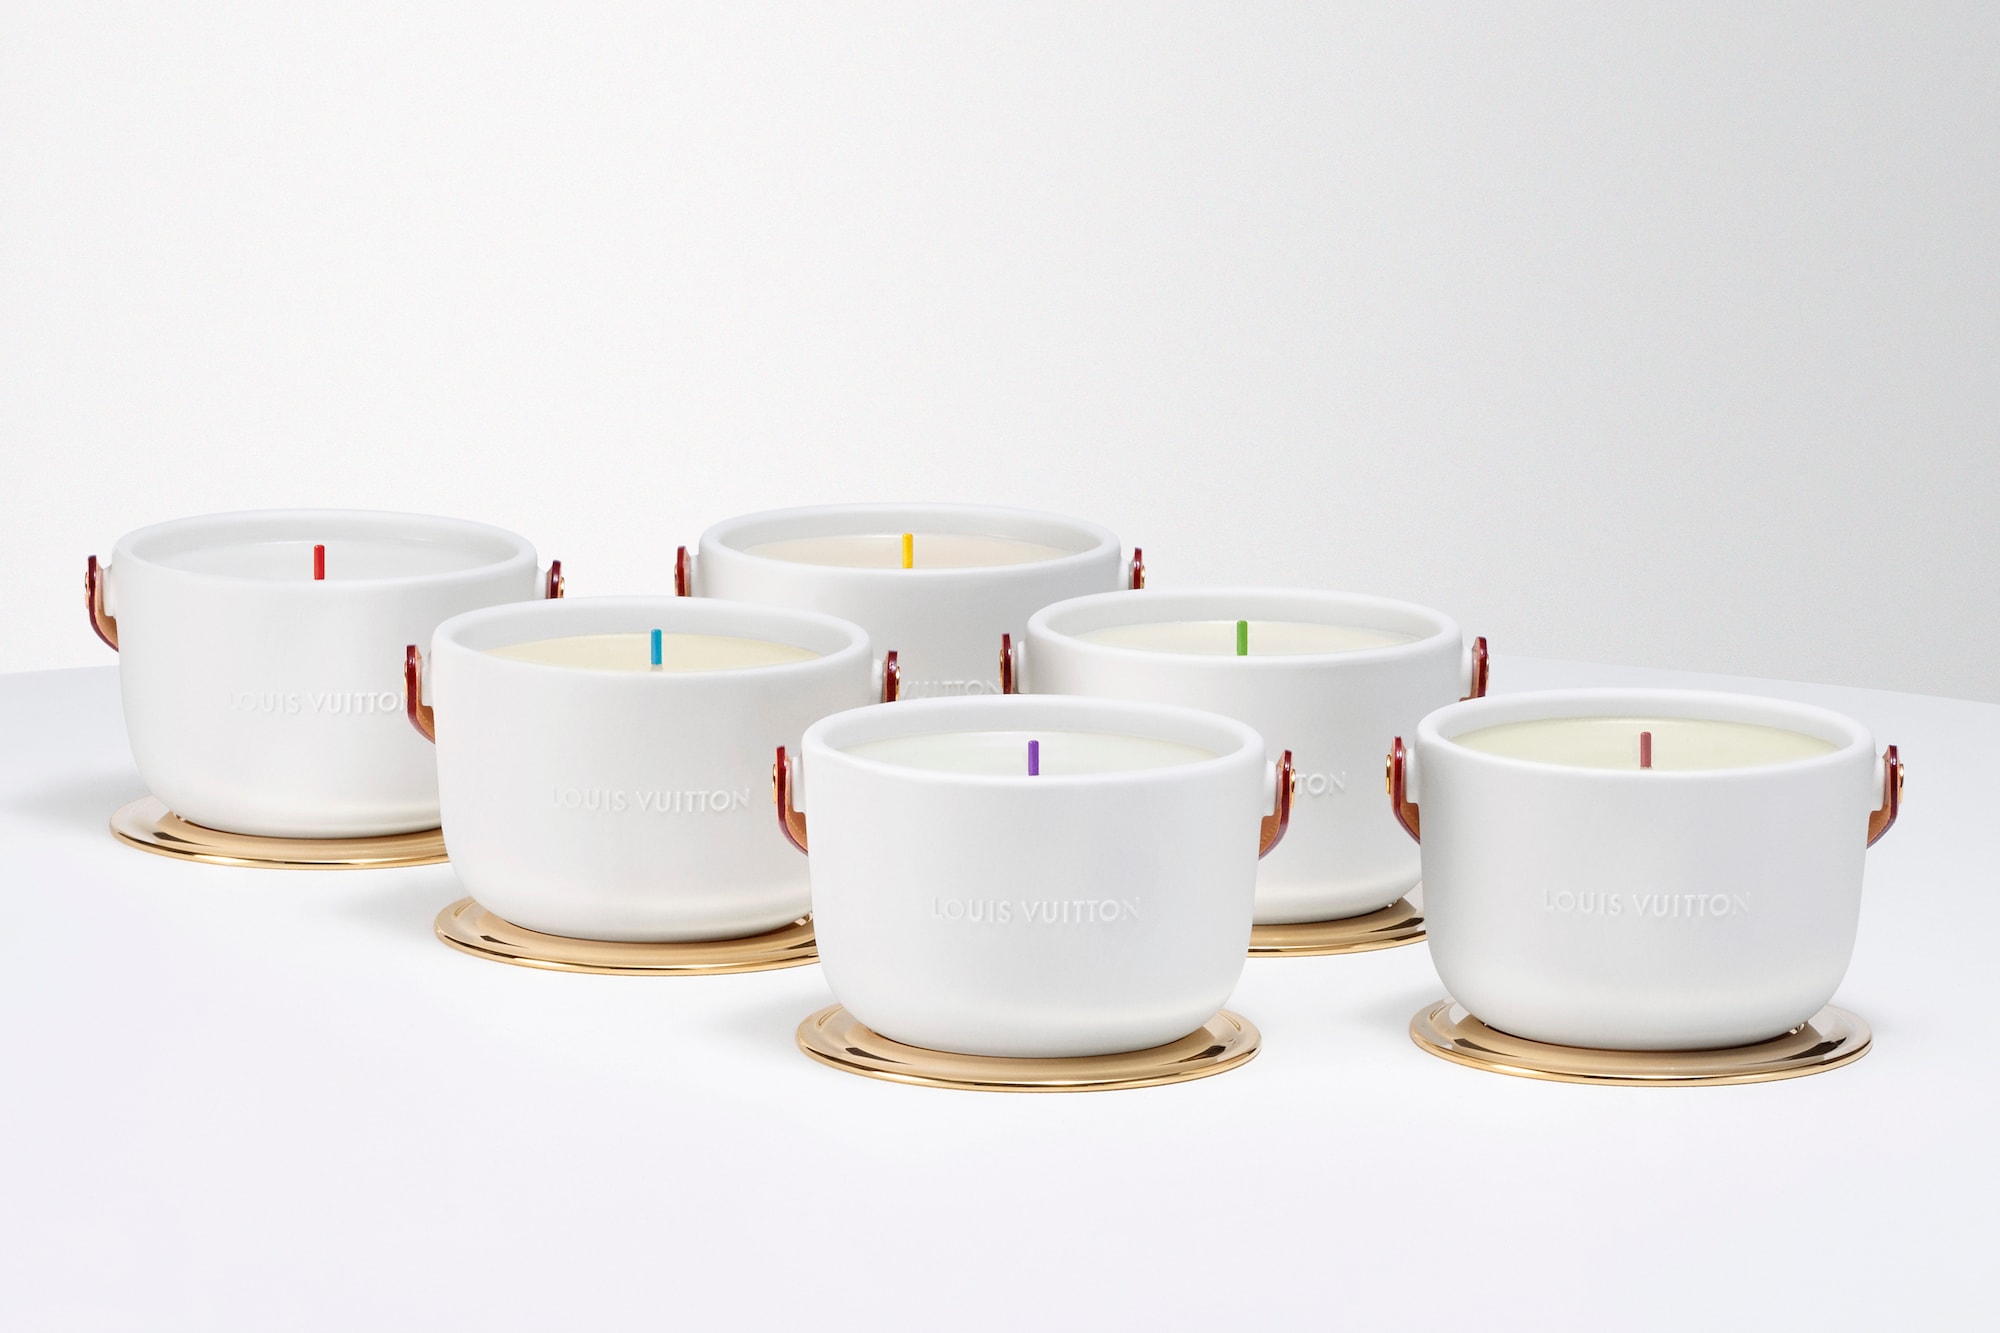 Louis Vuitton Releases New Scented Candles